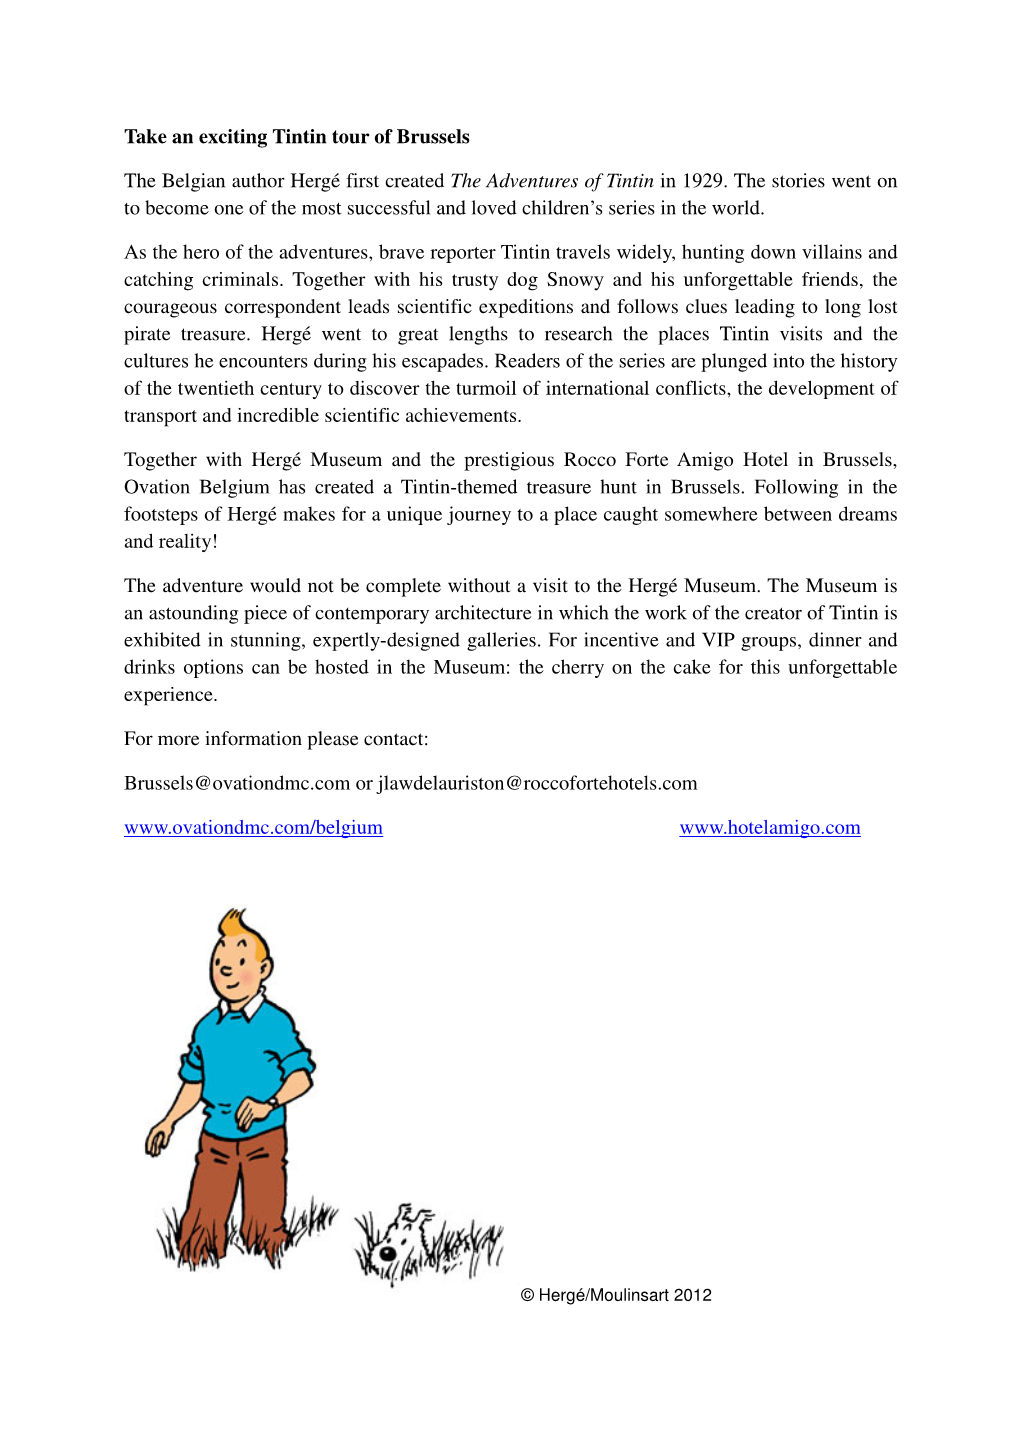 Take an Exciting Tintin Tour of Brussels the Belgian Author Hergé First